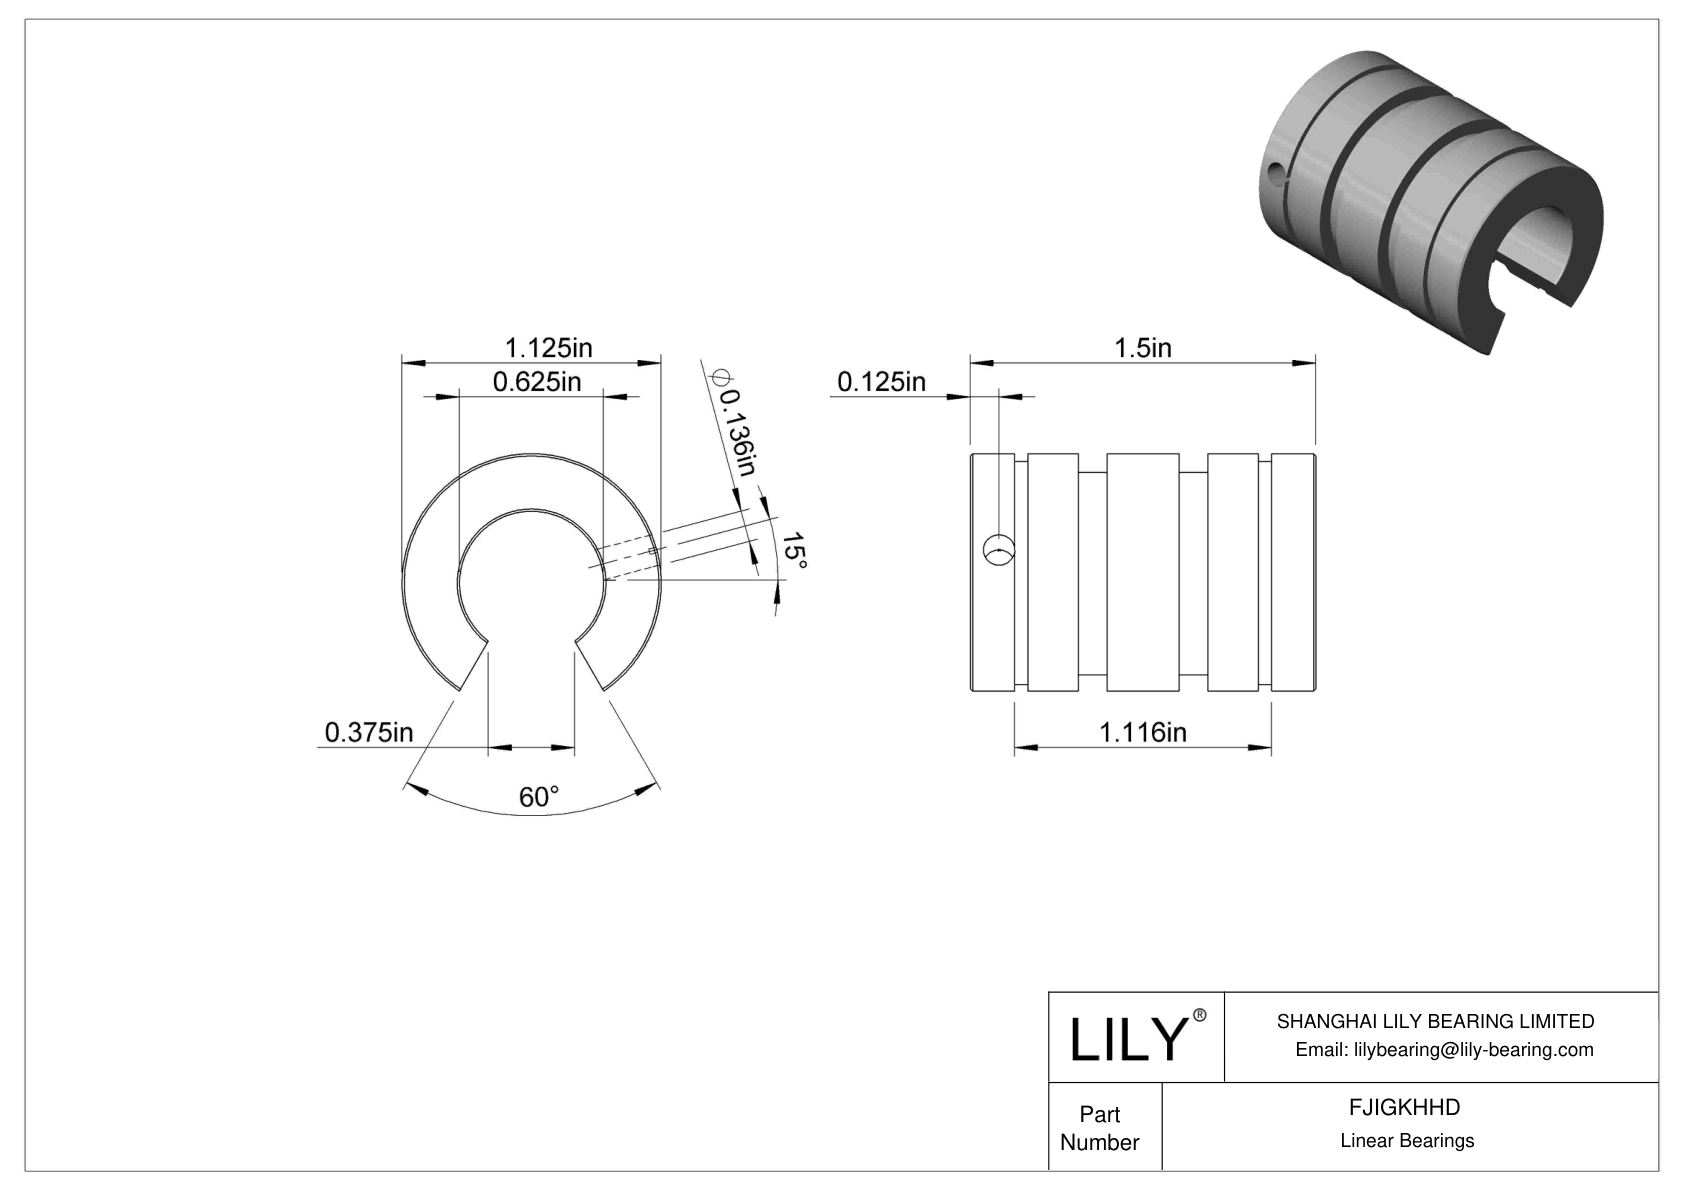 FJIGKHHD Common Linear Sleeve Bearings for Support Rail Shafts cad drawing